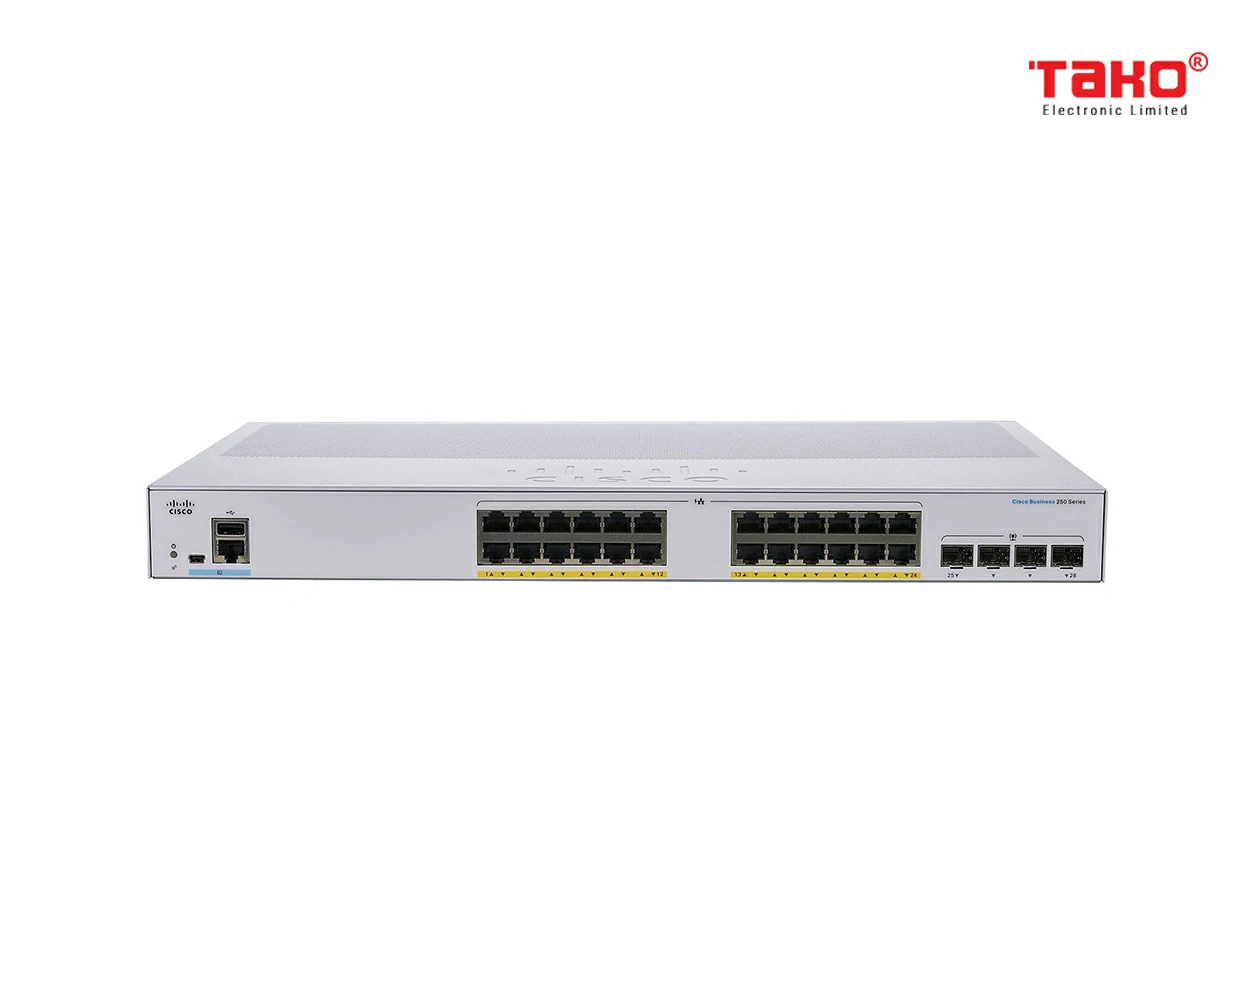 Cisco CBS250-24FP-4G 24-port 10/100/1000 Mbps PoE Layer 2 manageable web switch 4 SFP slots 1